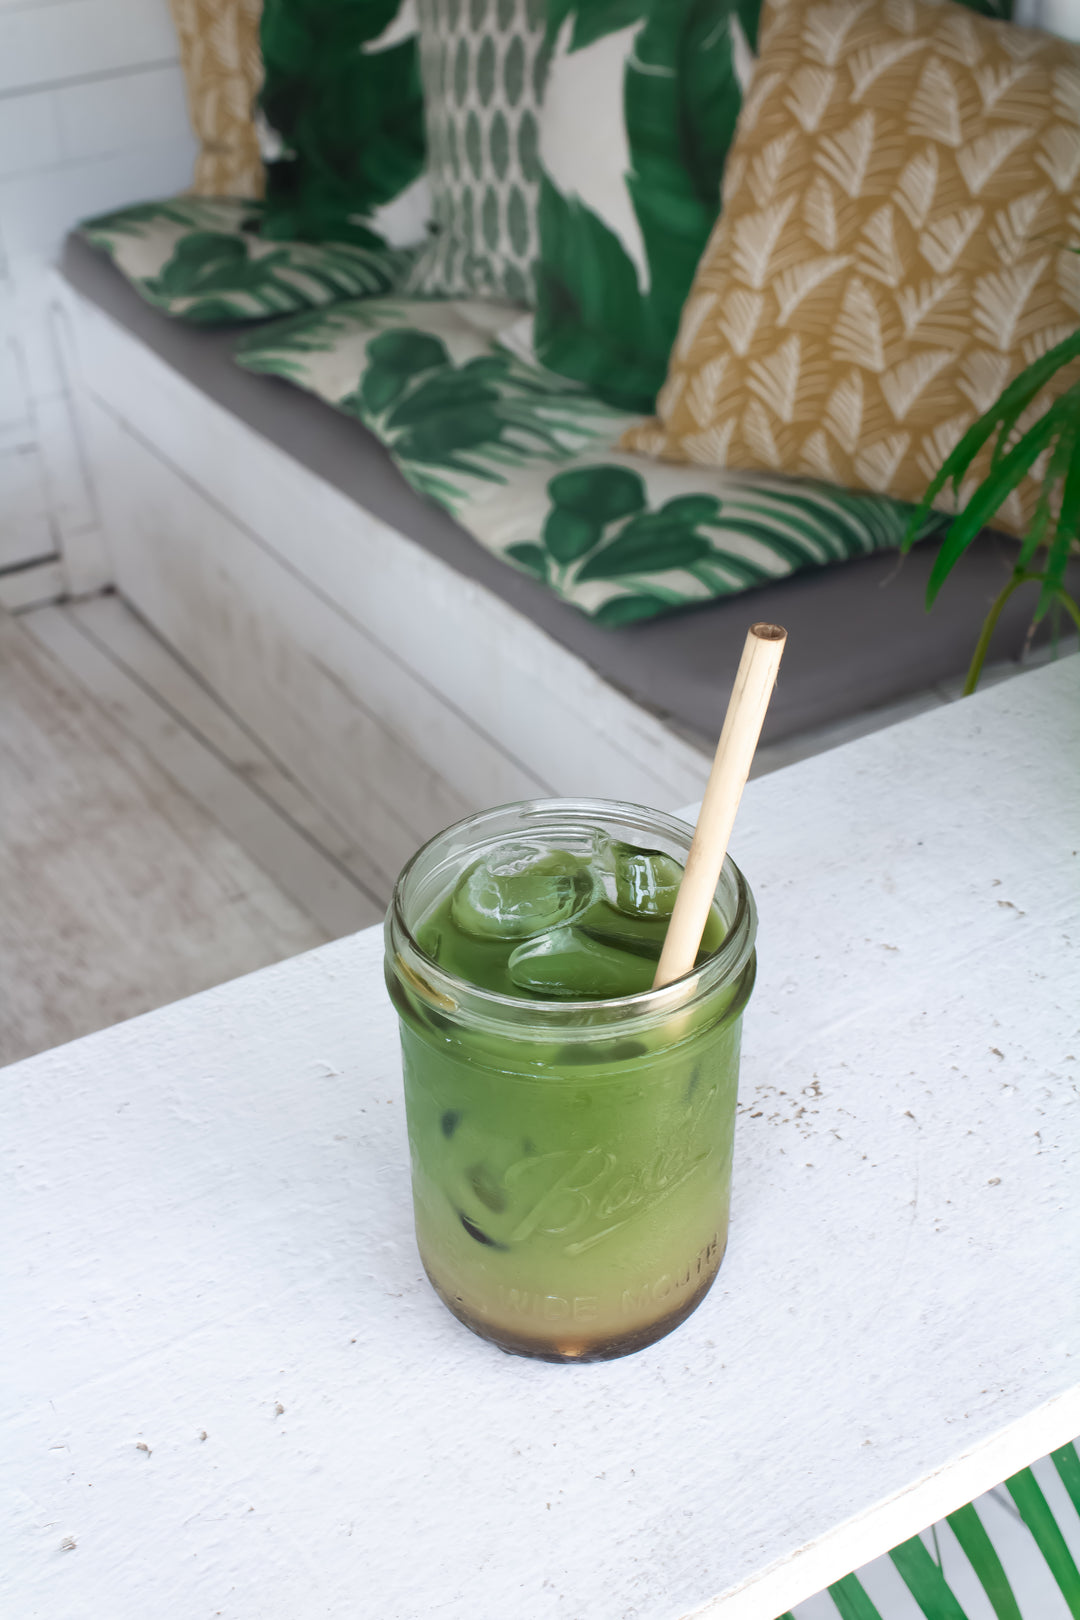 A tasty green drink waiting to be drank. Boomers Total Health System has what your body needs to feel great in one simple drink